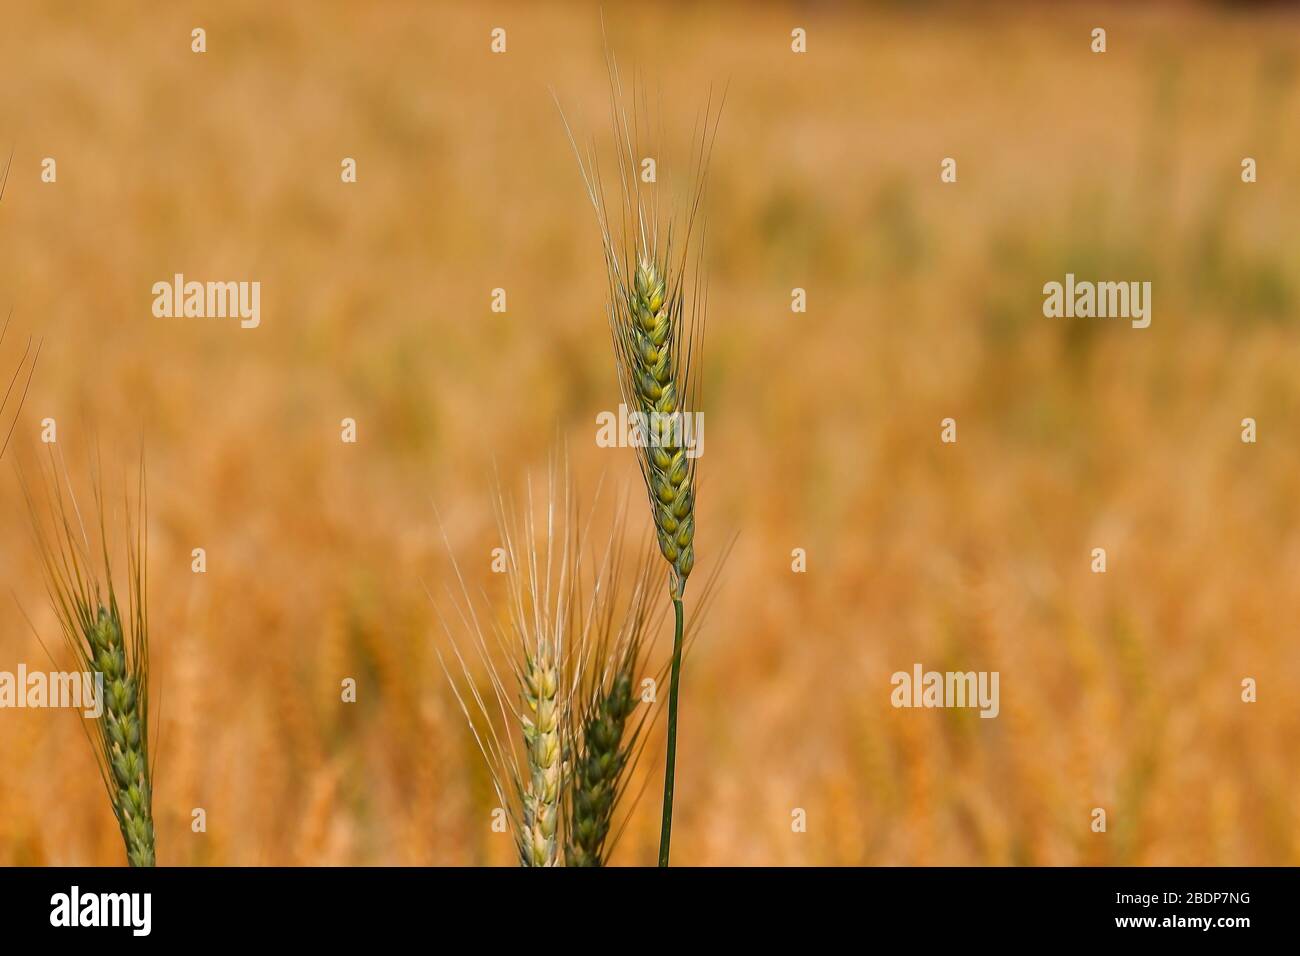 close up of ear of wheat blooming in agriculture field, concept for agriculture or gardening Stock Photo